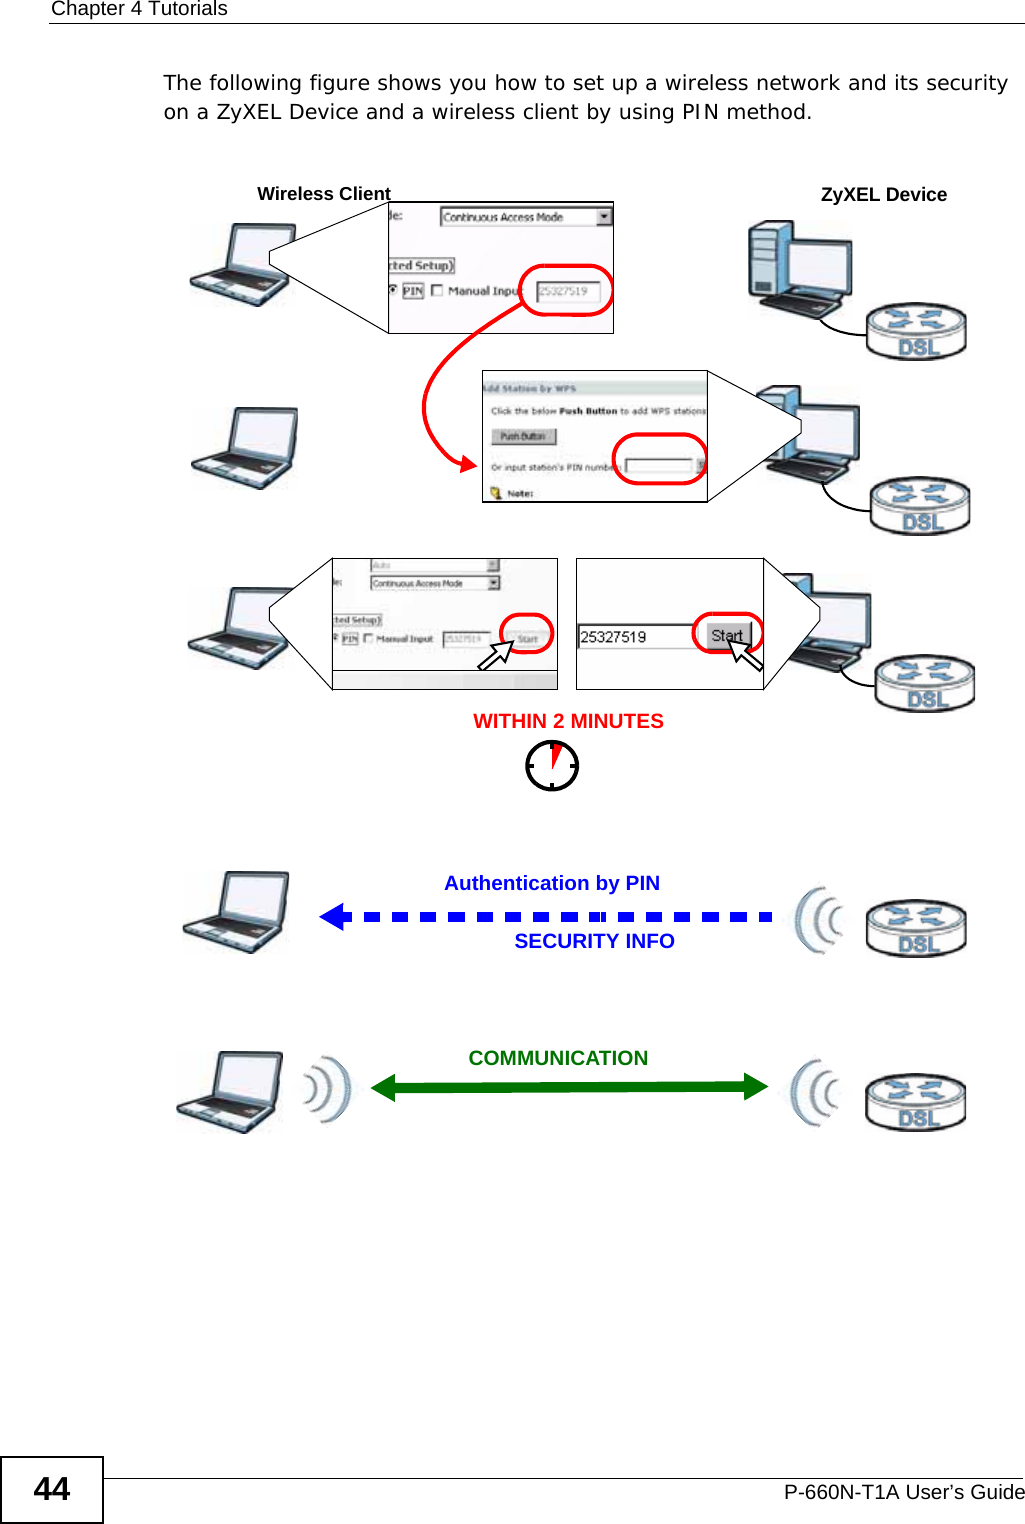 Chapter 4 TutorialsP-660N-T1A User’s Guide44The following figure shows you how to set up a wireless network and its security on a ZyXEL Device and a wireless client by using PIN method. Example WPS Process: PIN MethodAuthentication by PINSECURITY INFOWITHIN 2 MINUTESWireless ClientZyXEL DeviceCOMMUNICATION